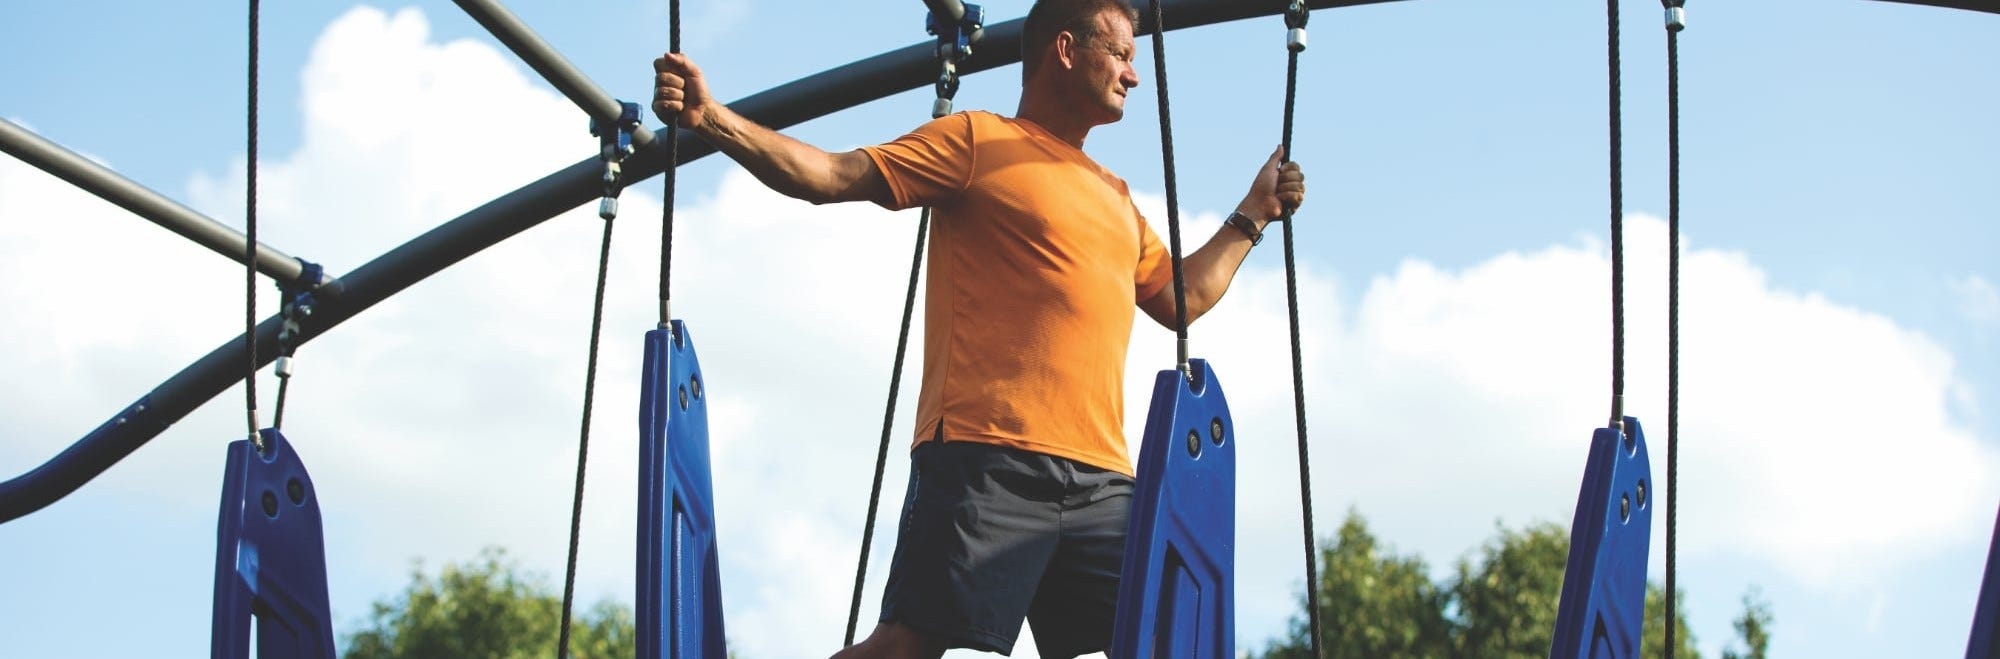 Three Great Ideas for Creating Outdoor Fitness Areas